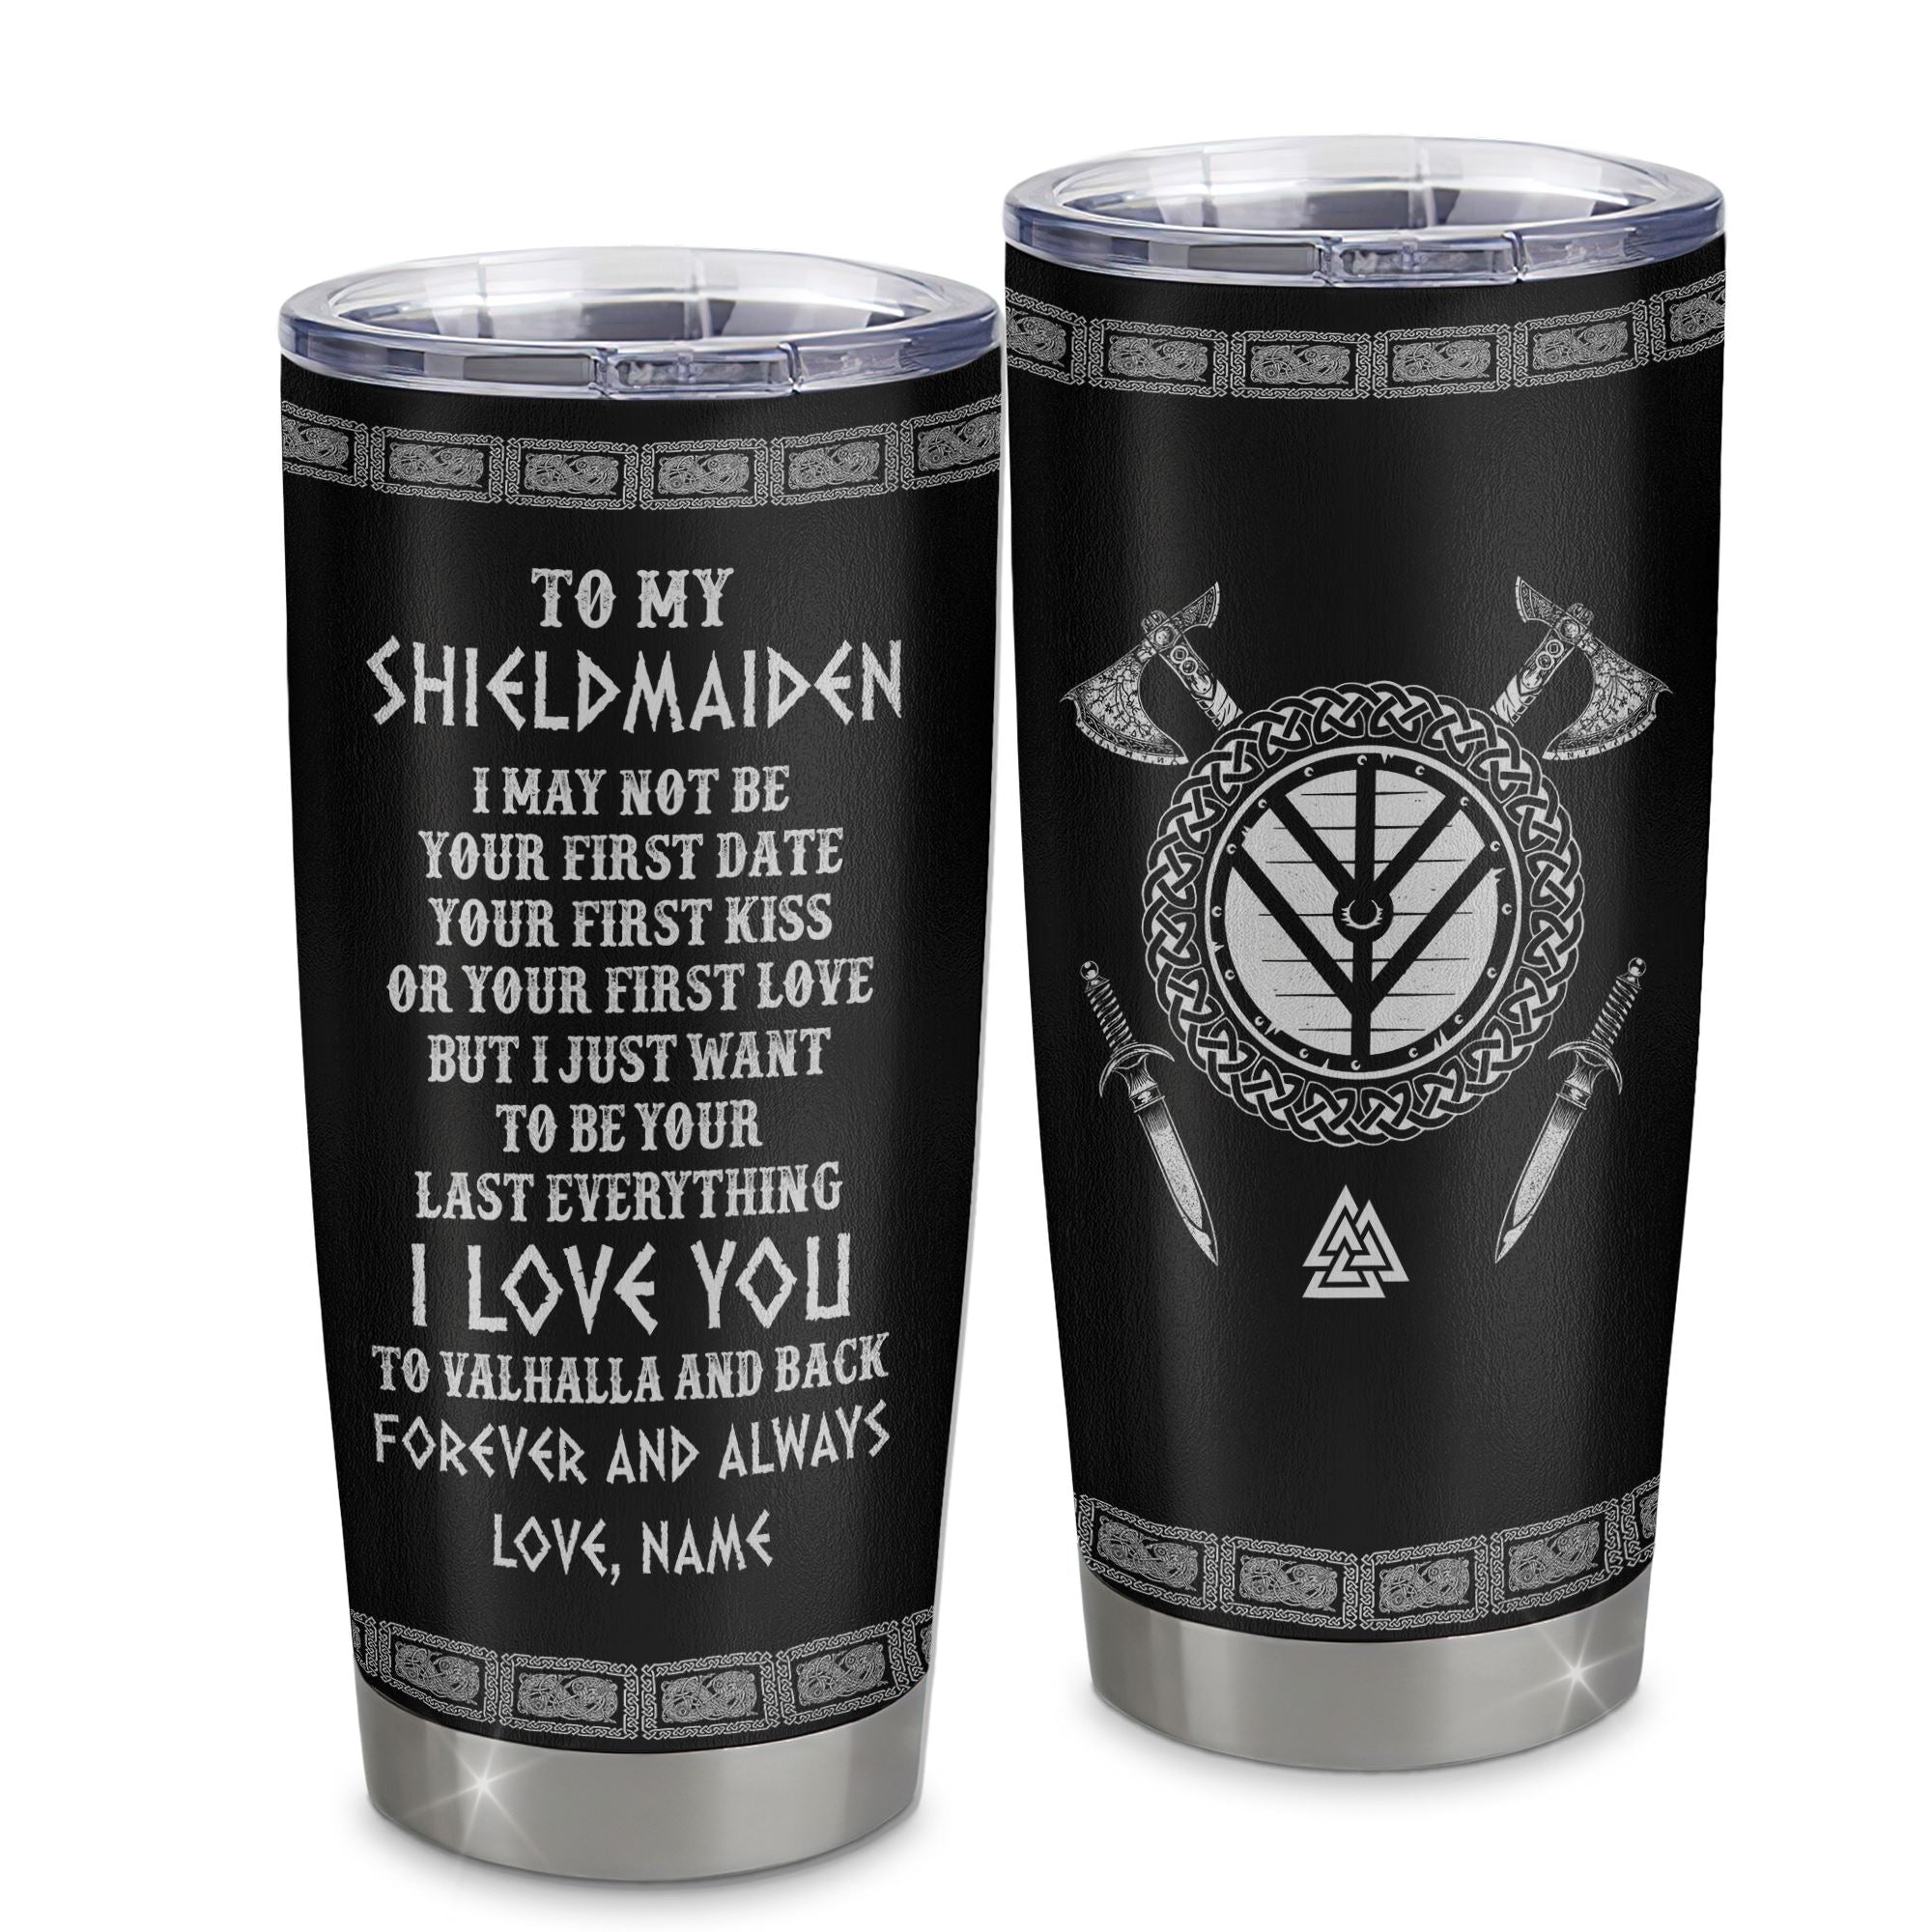 Personalized To My Shieldmaiden Viking Tumbler I Love You To Valhalla And Back Wife Girlfriend Women Birthday Anniversary Valentines Day Christmas Travel Mug